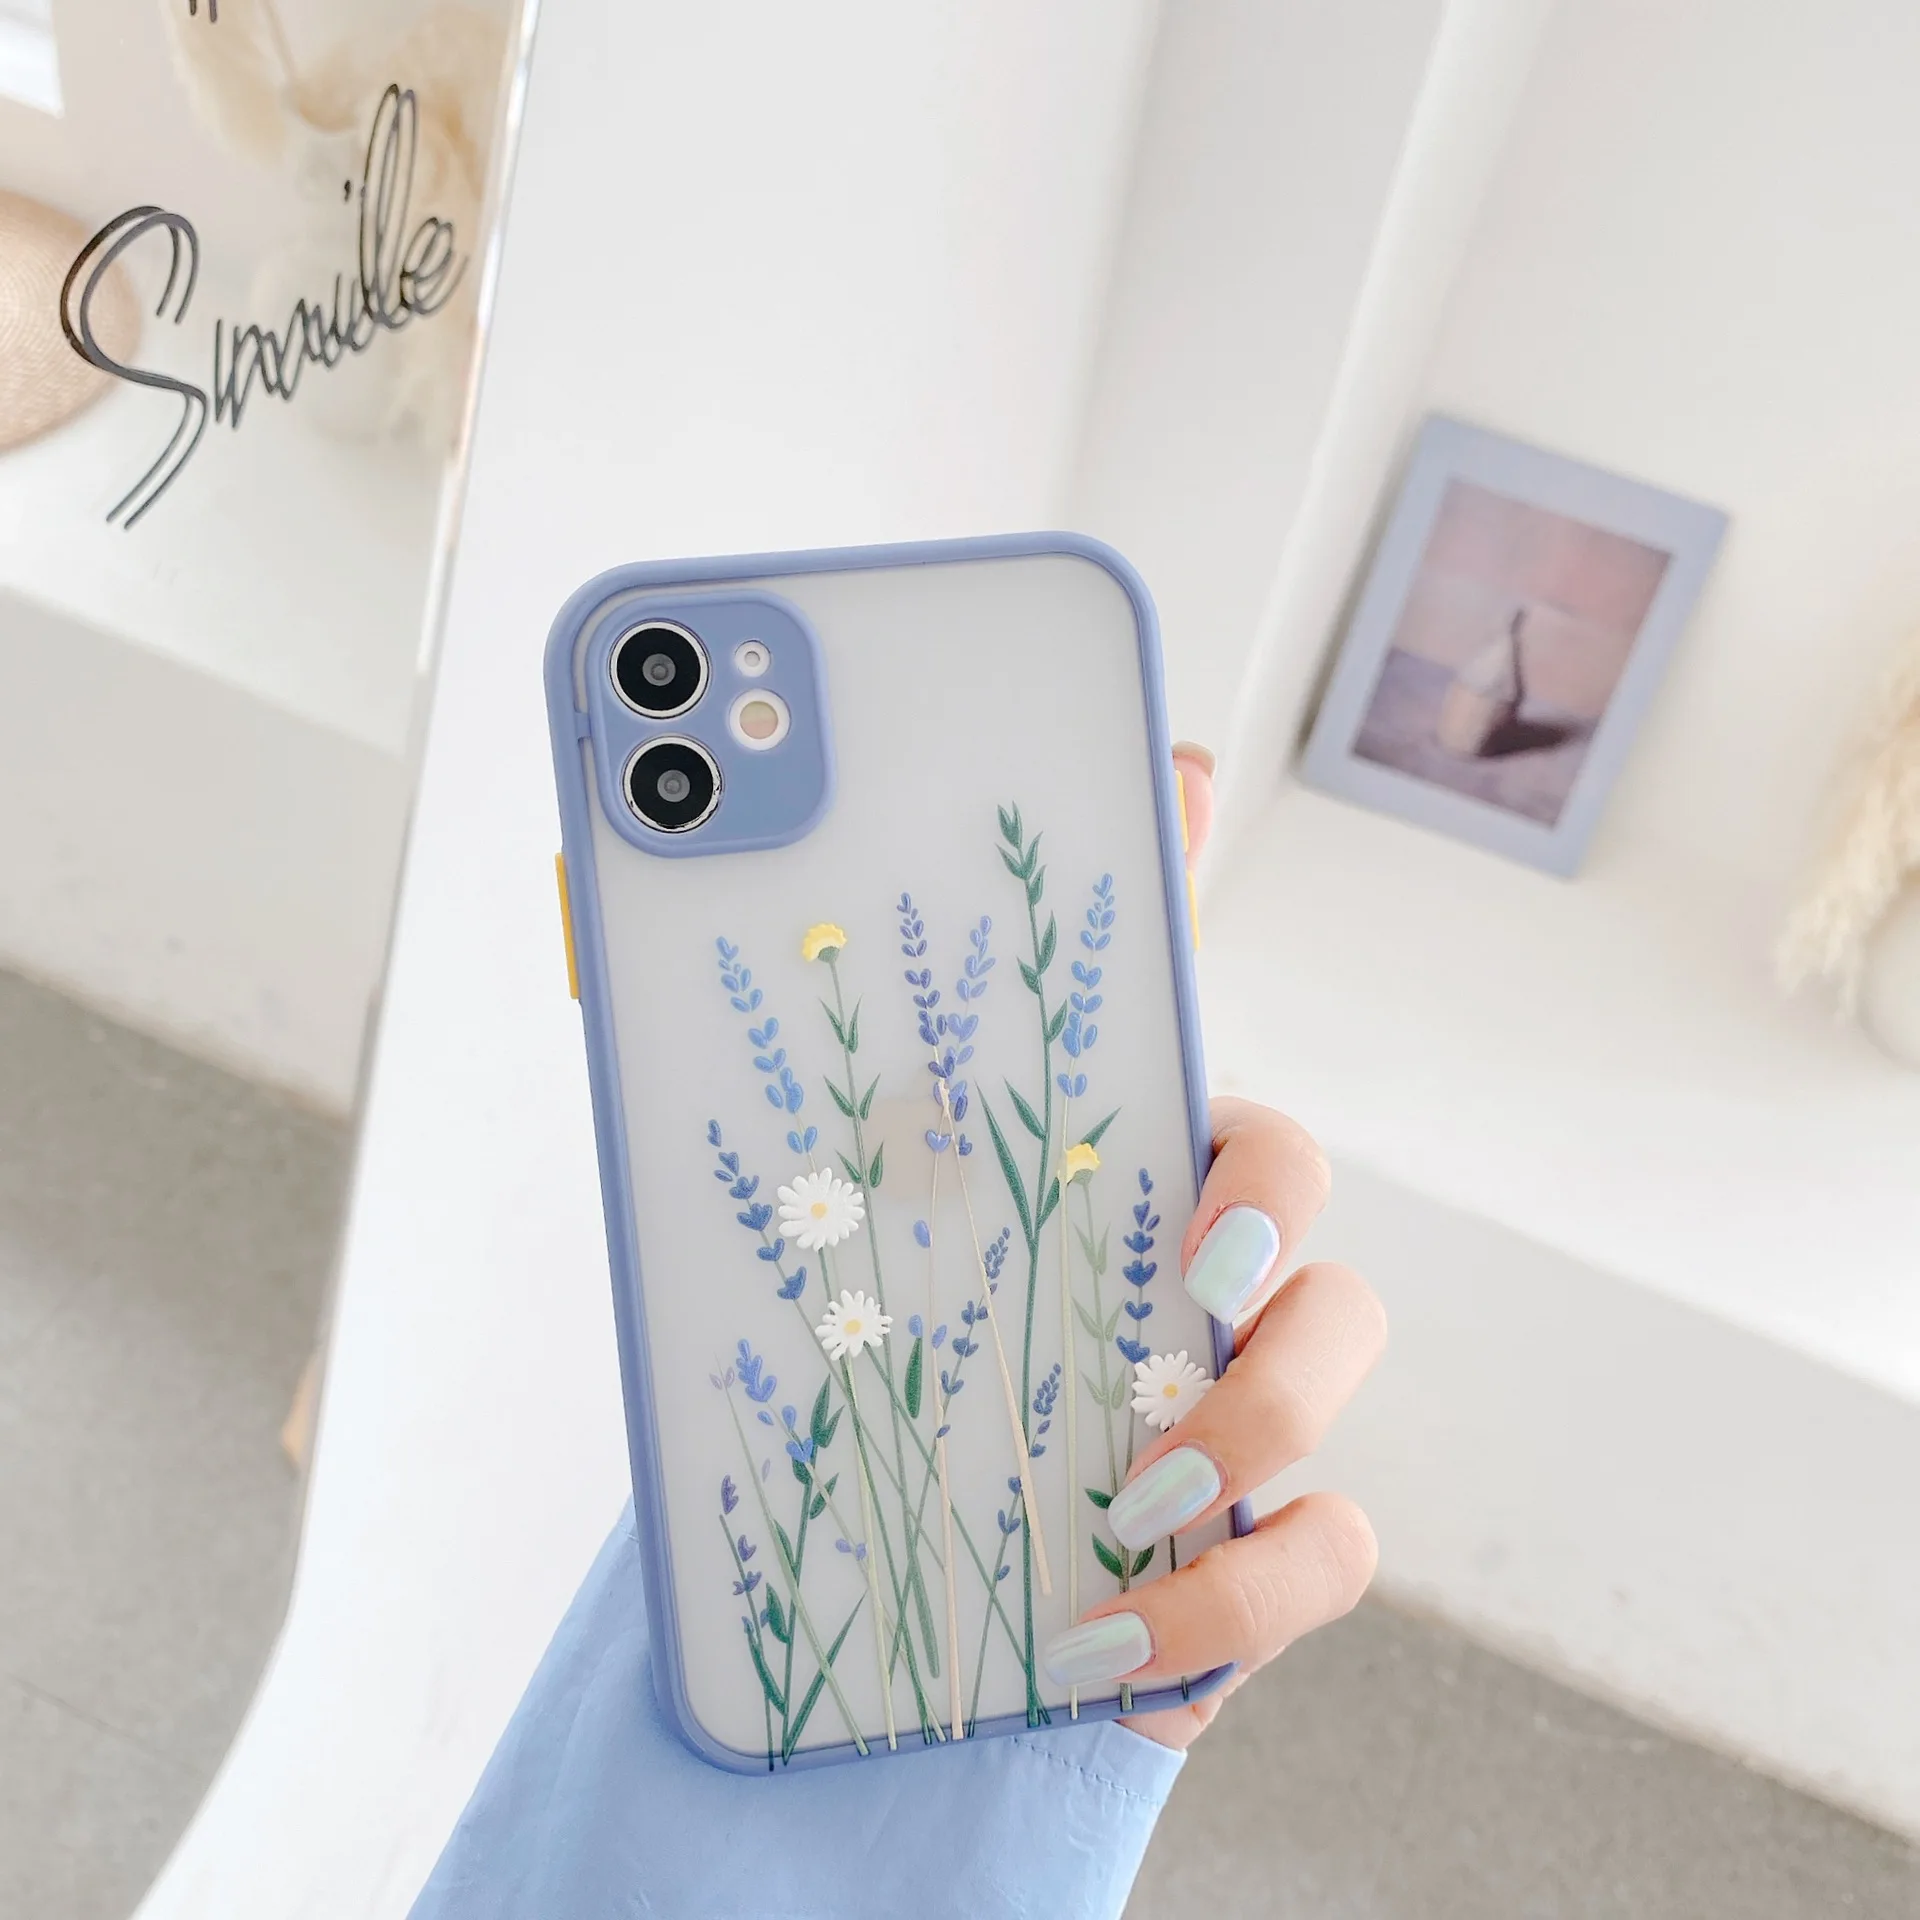 Luxury 3D Relief Flower Case For iPhone 12 Mini 11 Pro Max X XR XS Max 7 8 Plus